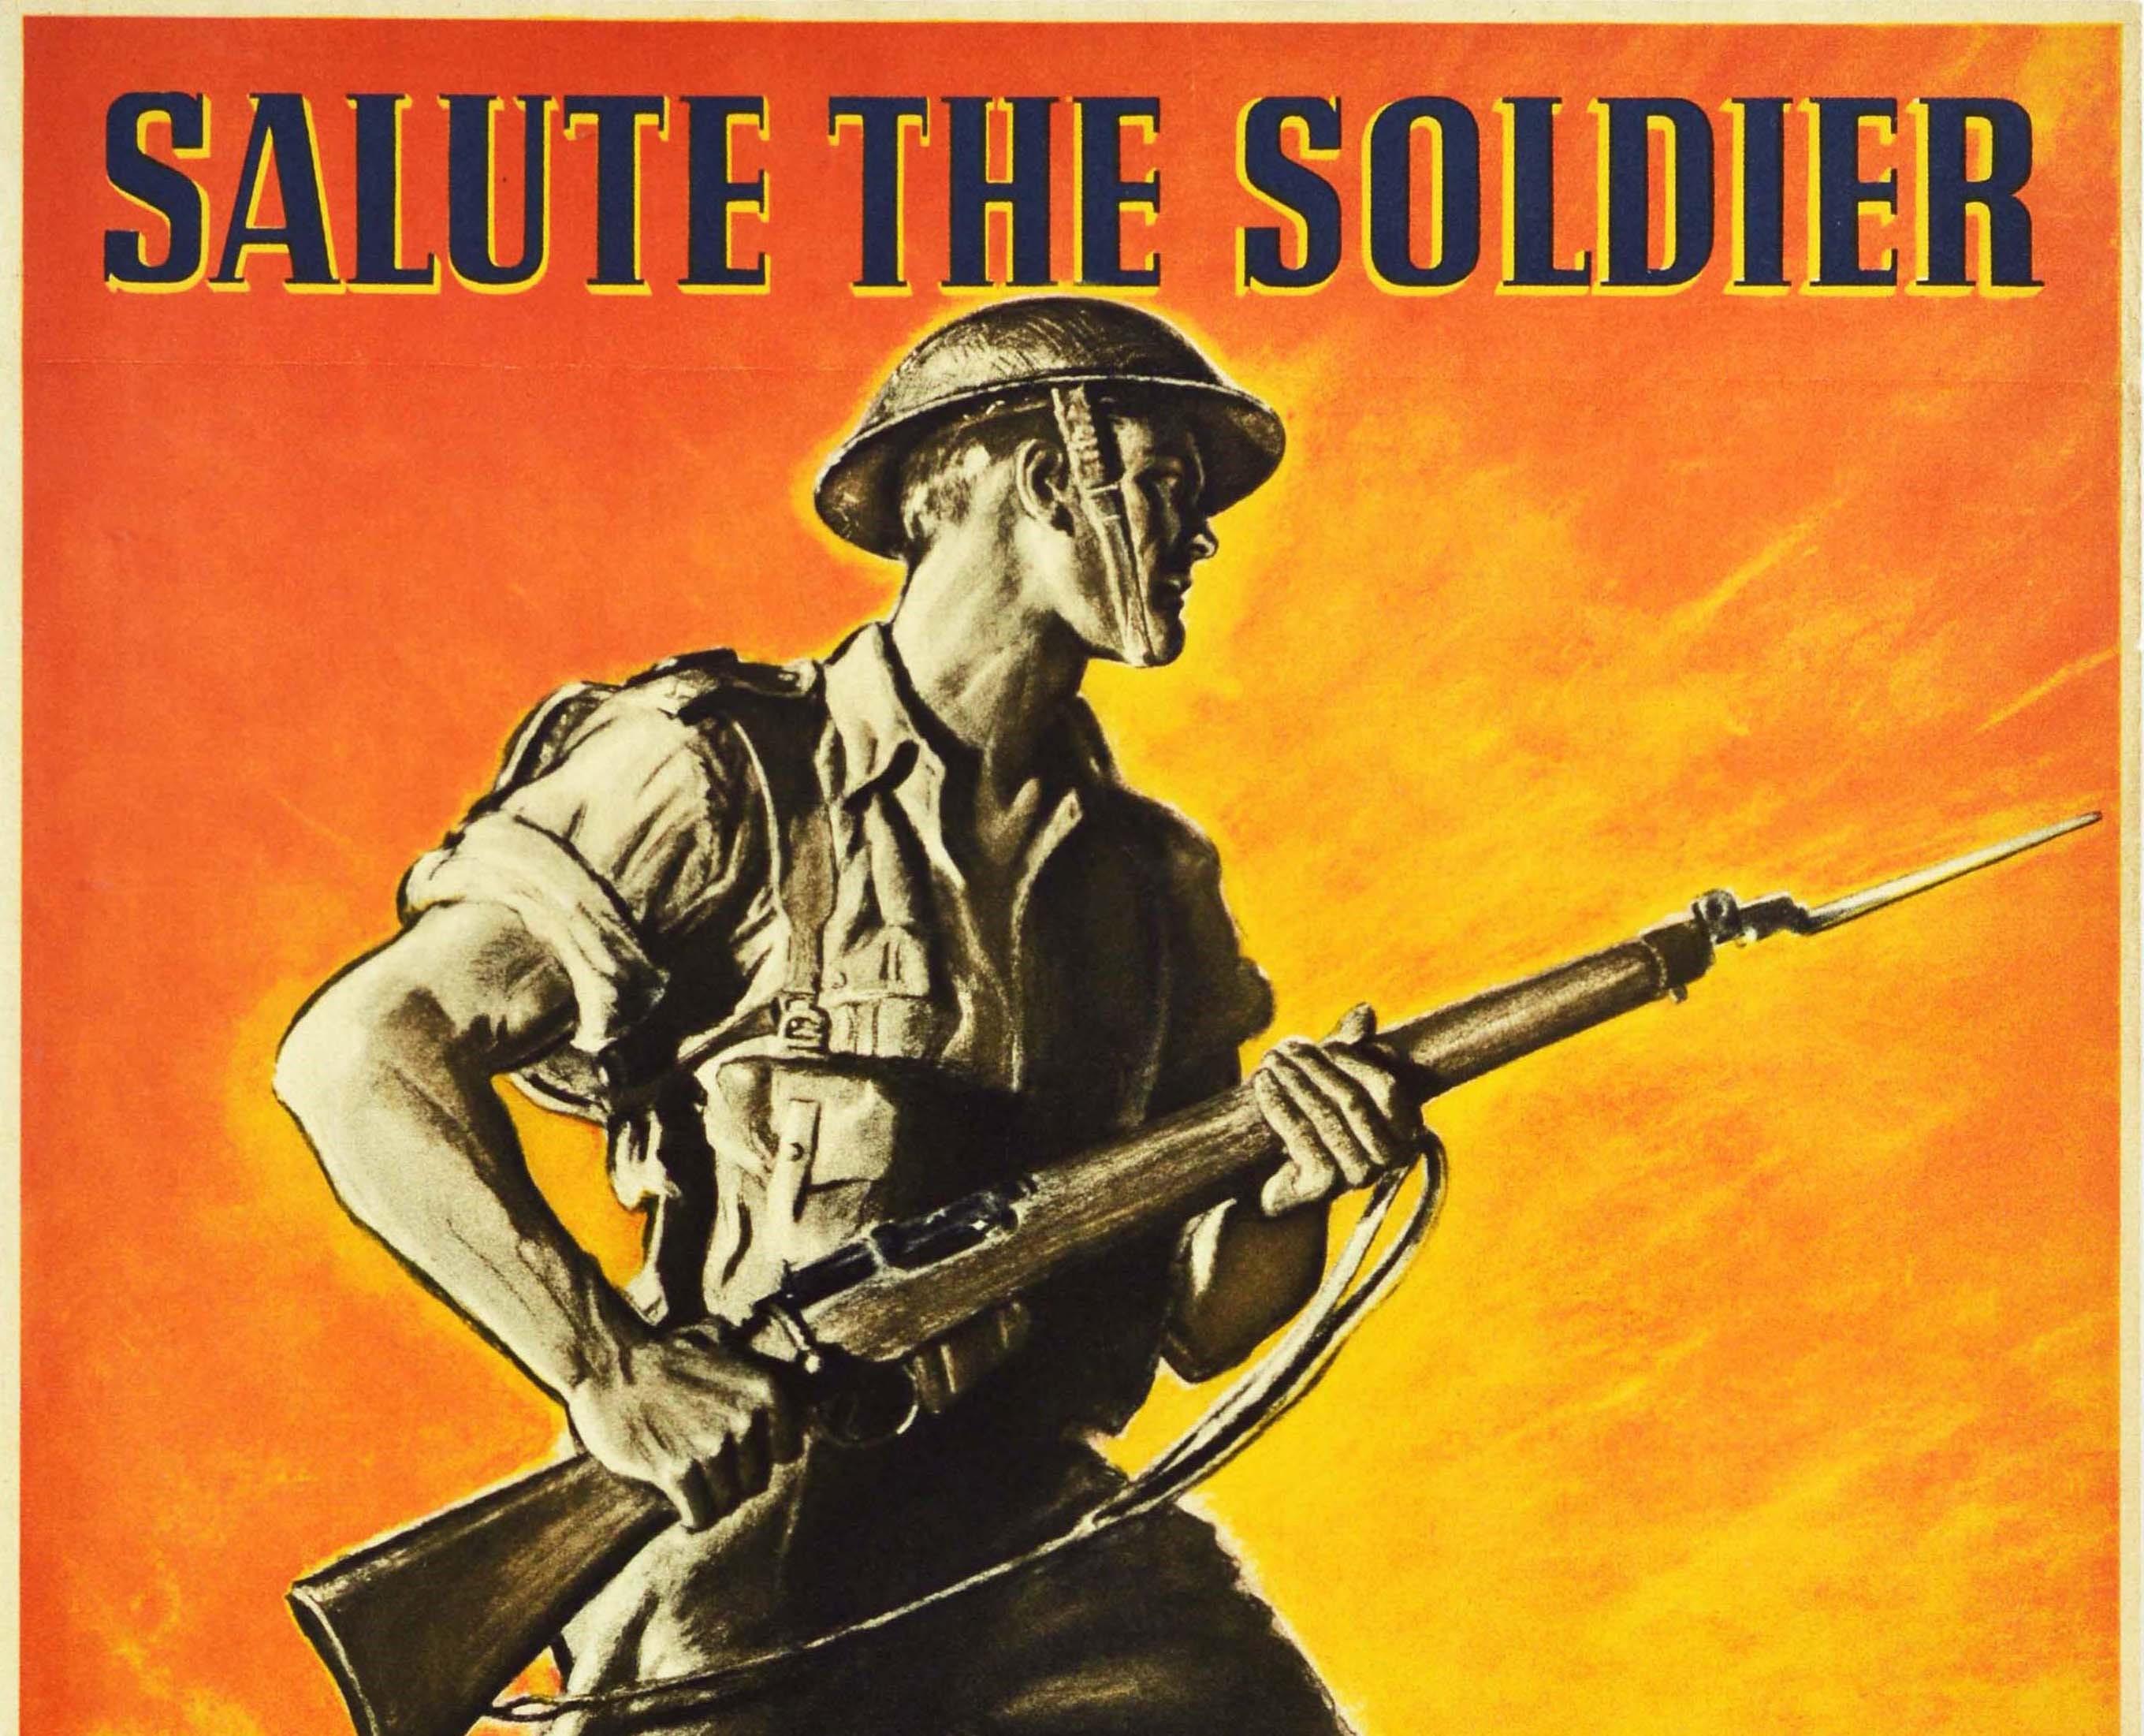 Original Vintage WWII Poster Salute The Soldier The Liberator Save Lend More  - Print by J.A. May